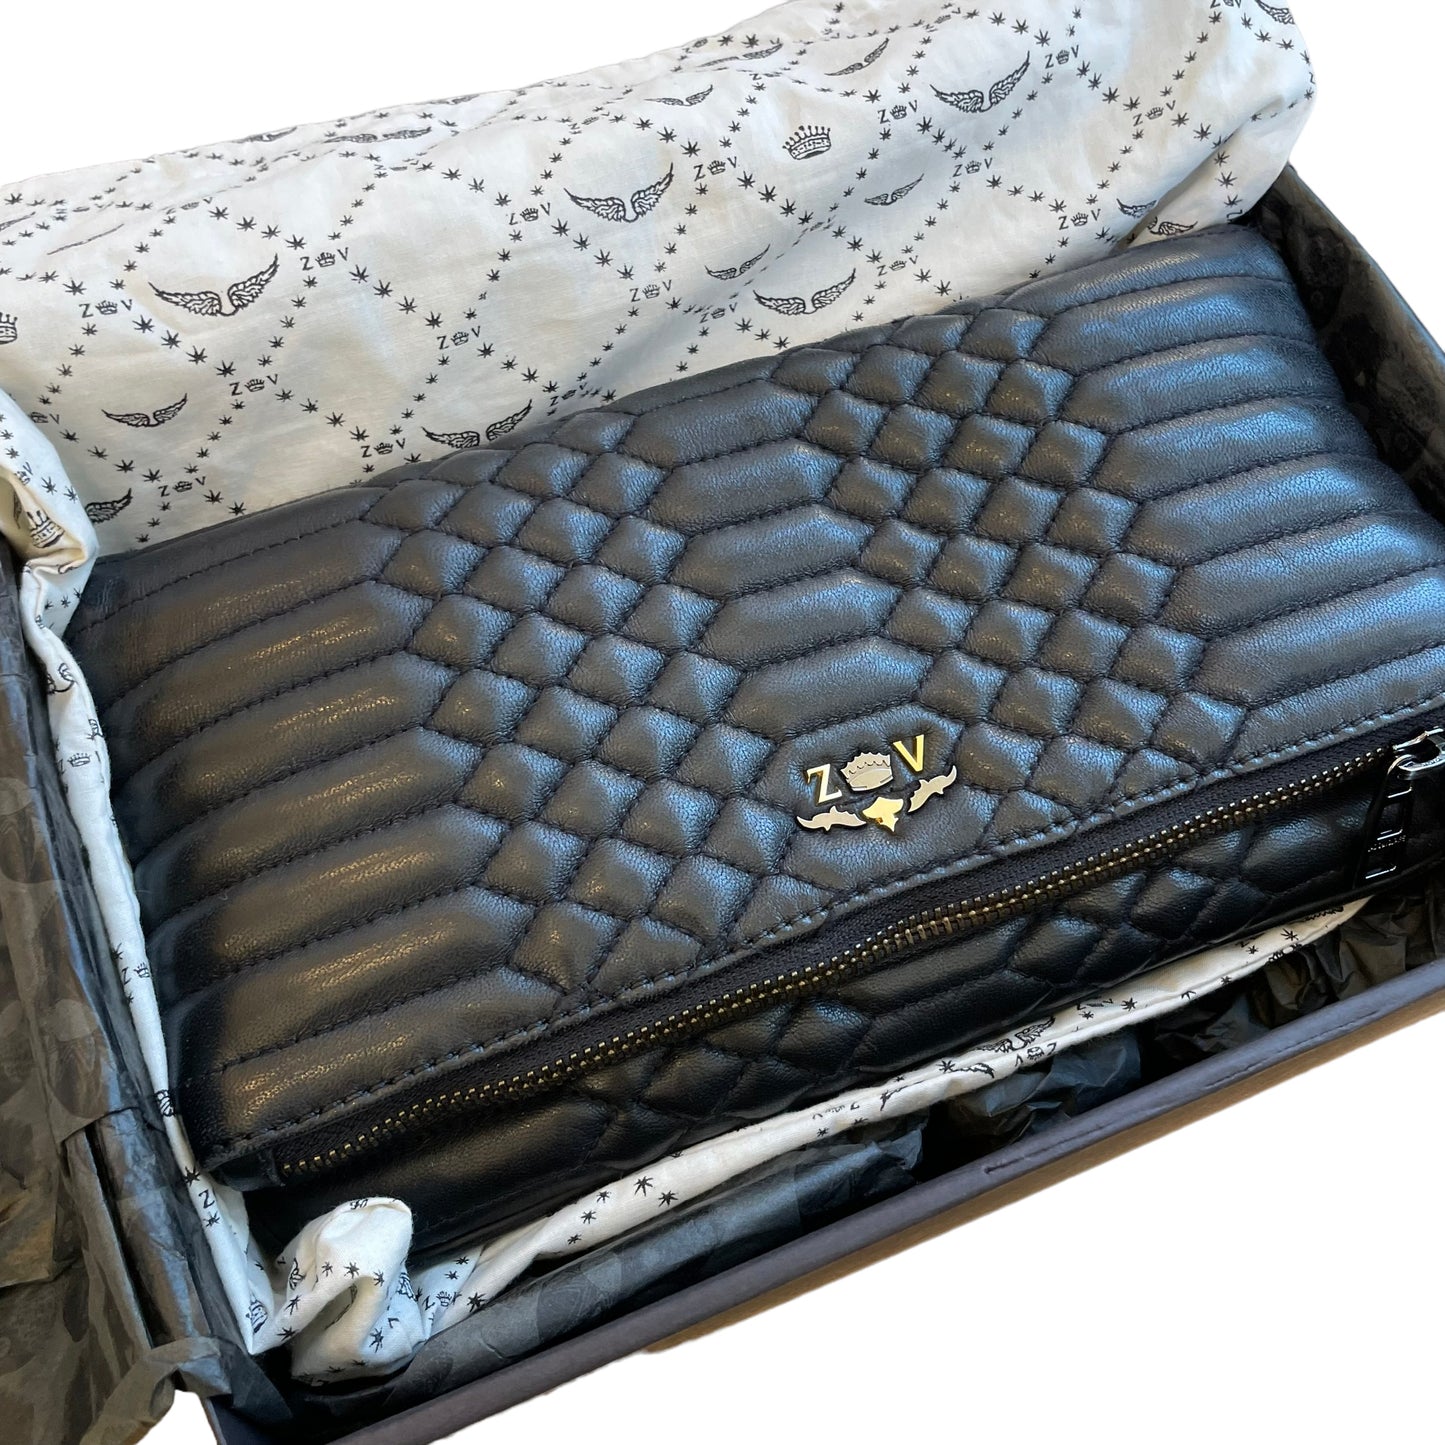 Leather Quilted Bag